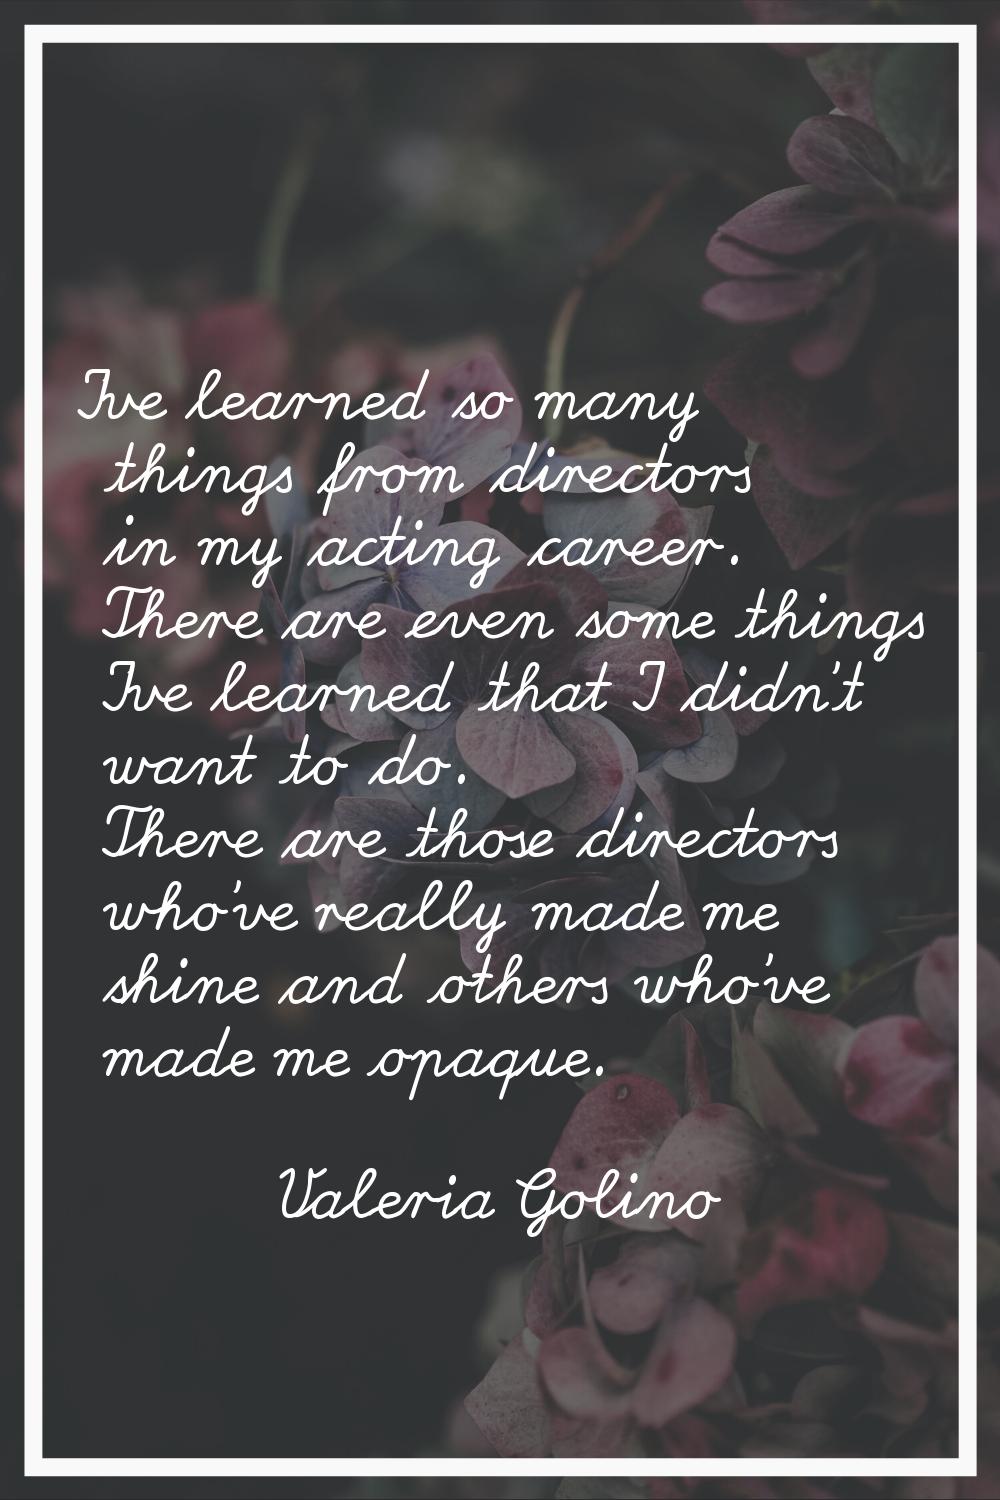 I've learned so many things from directors in my acting career. There are even some things I've lea